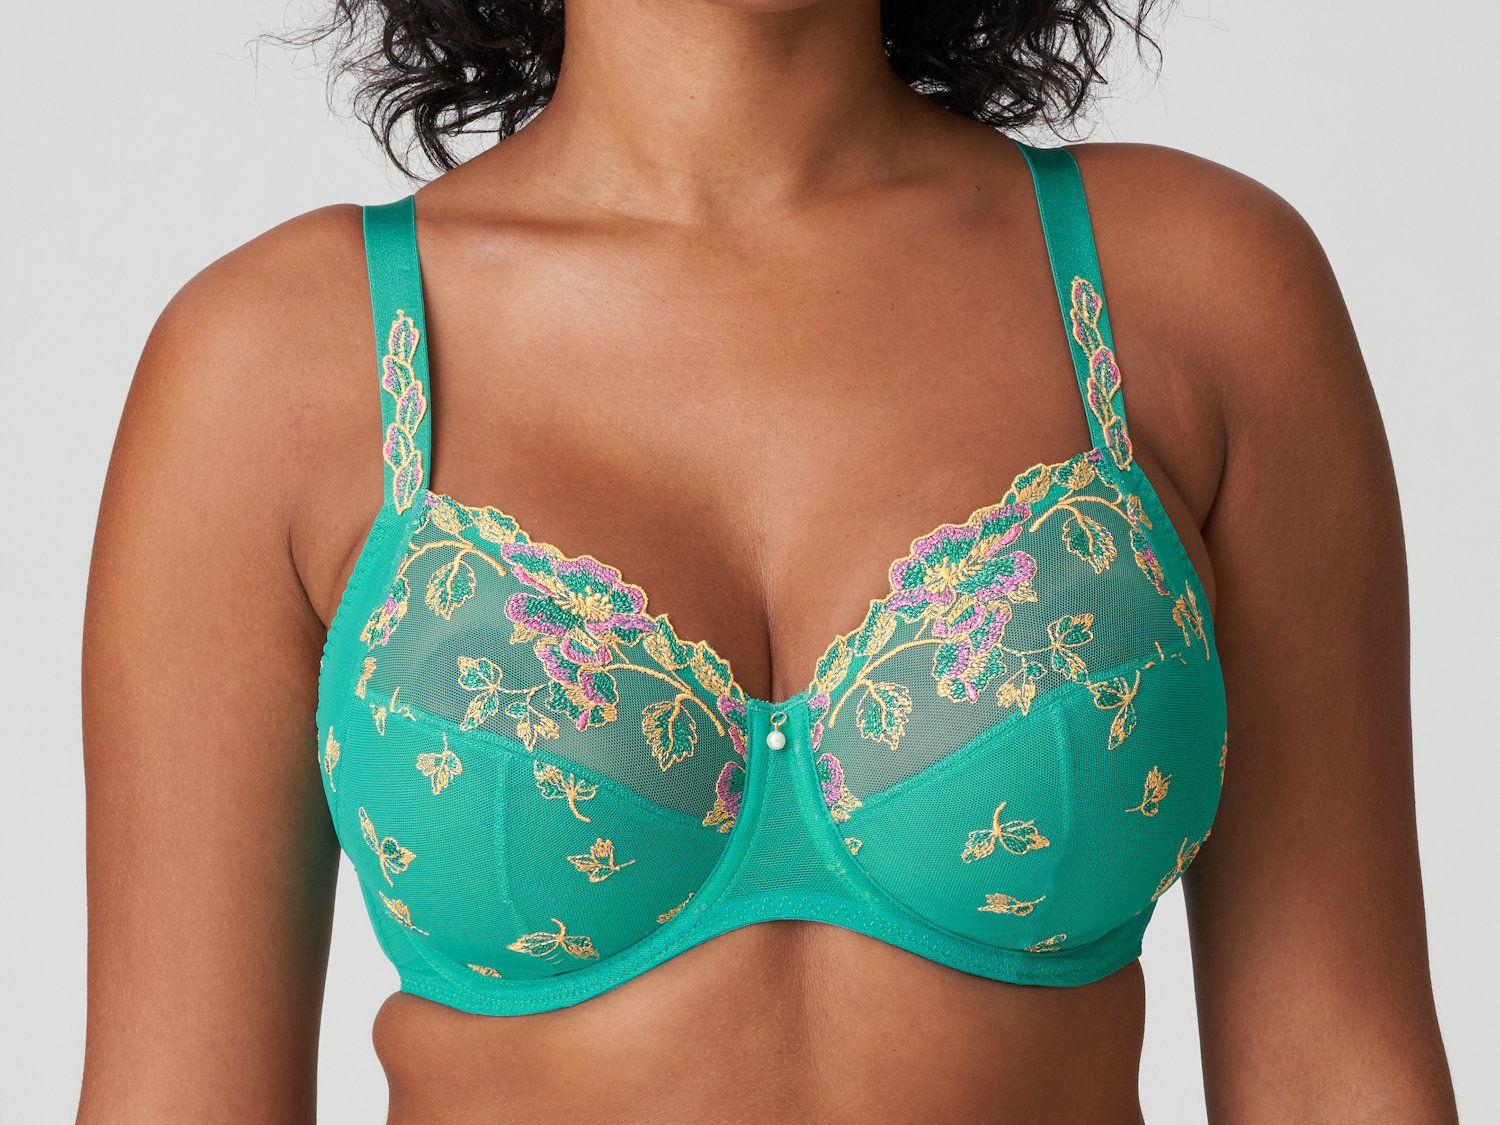 Big cup bra, embroidery, partially sheer cups, D to M-cup